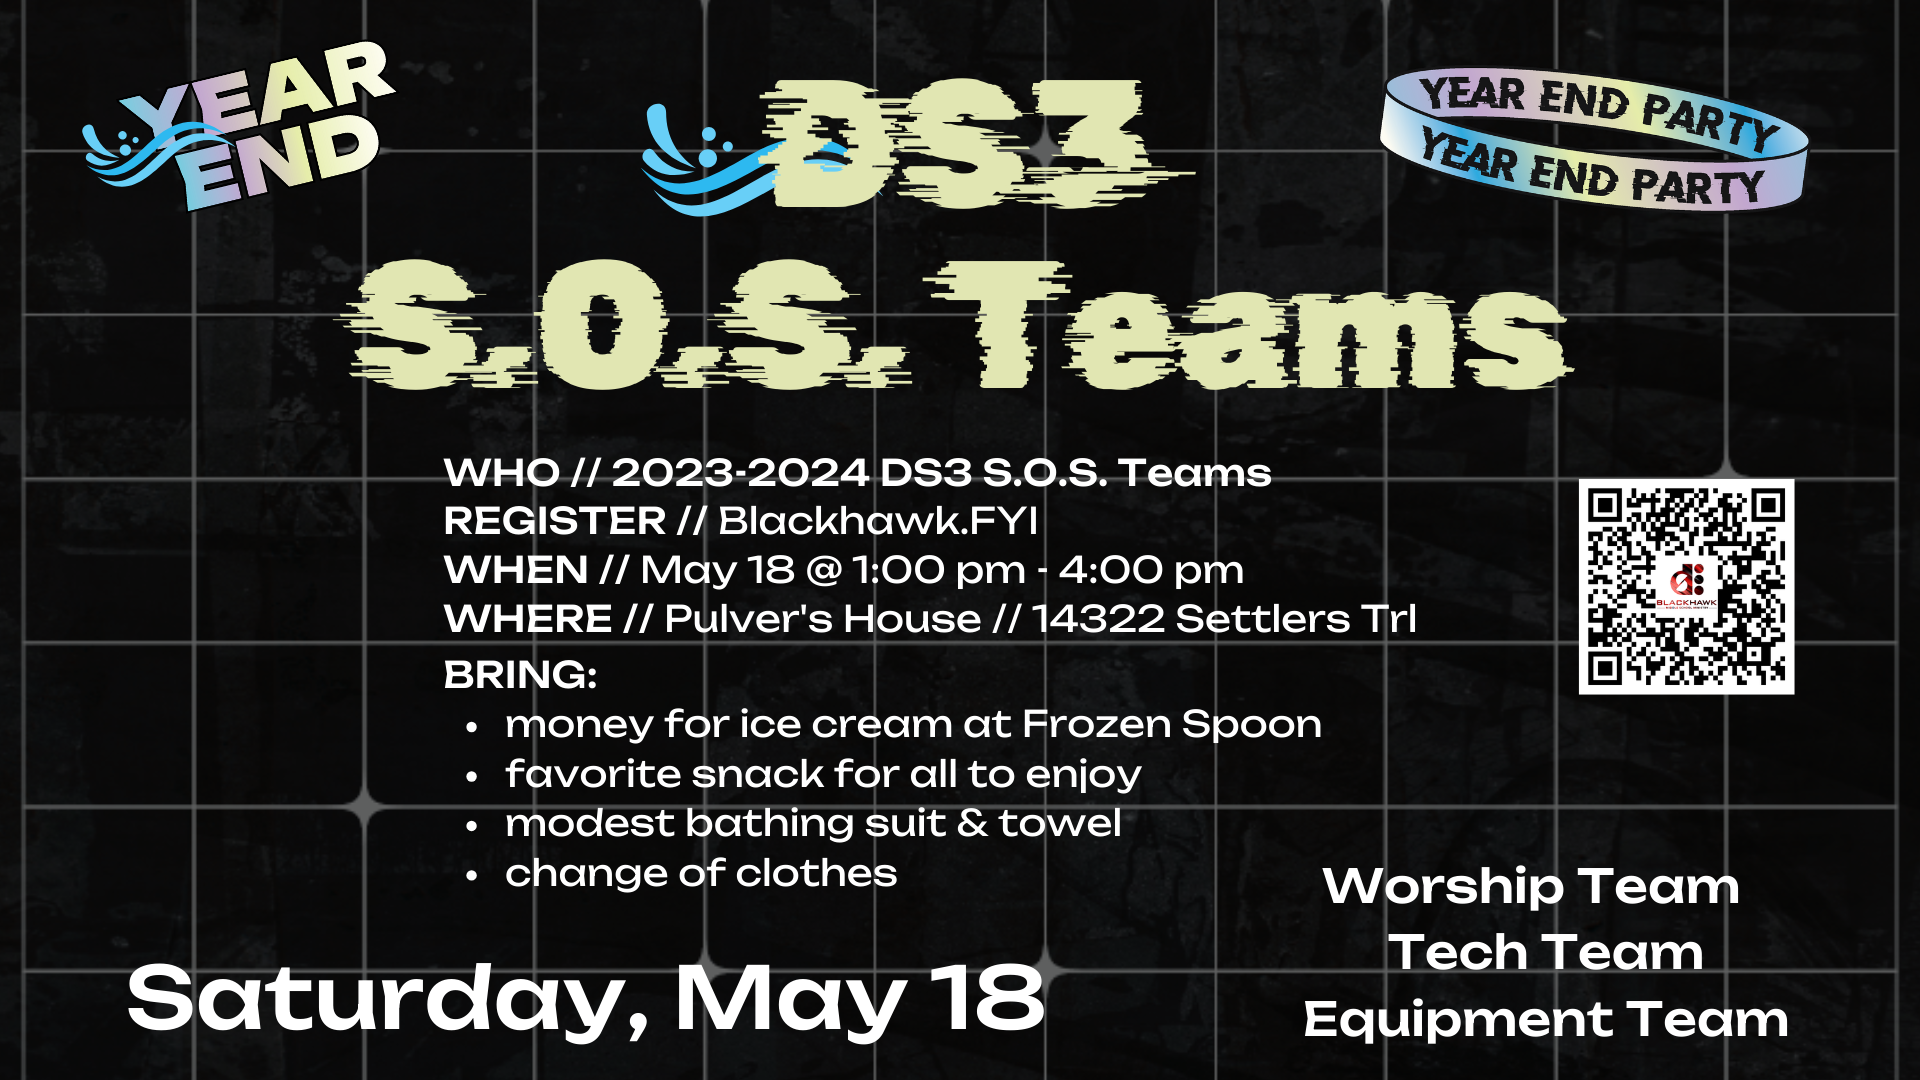 DS3 S.O.S. Teams Year End Event